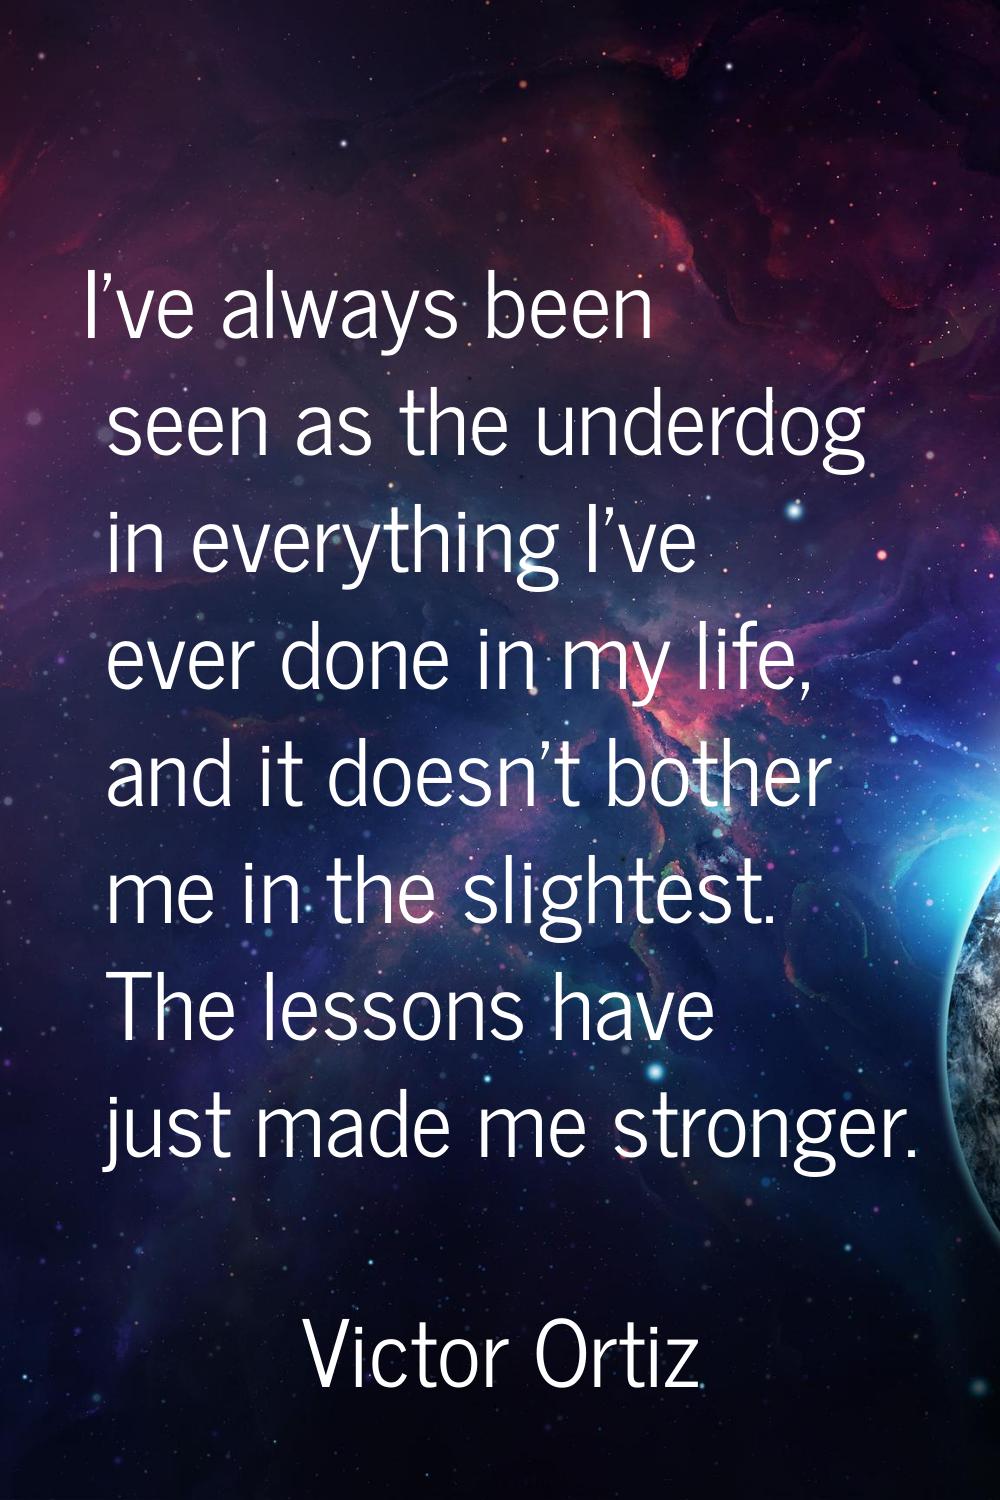 I've always been seen as the underdog in everything I've ever done in my life, and it doesn't bothe